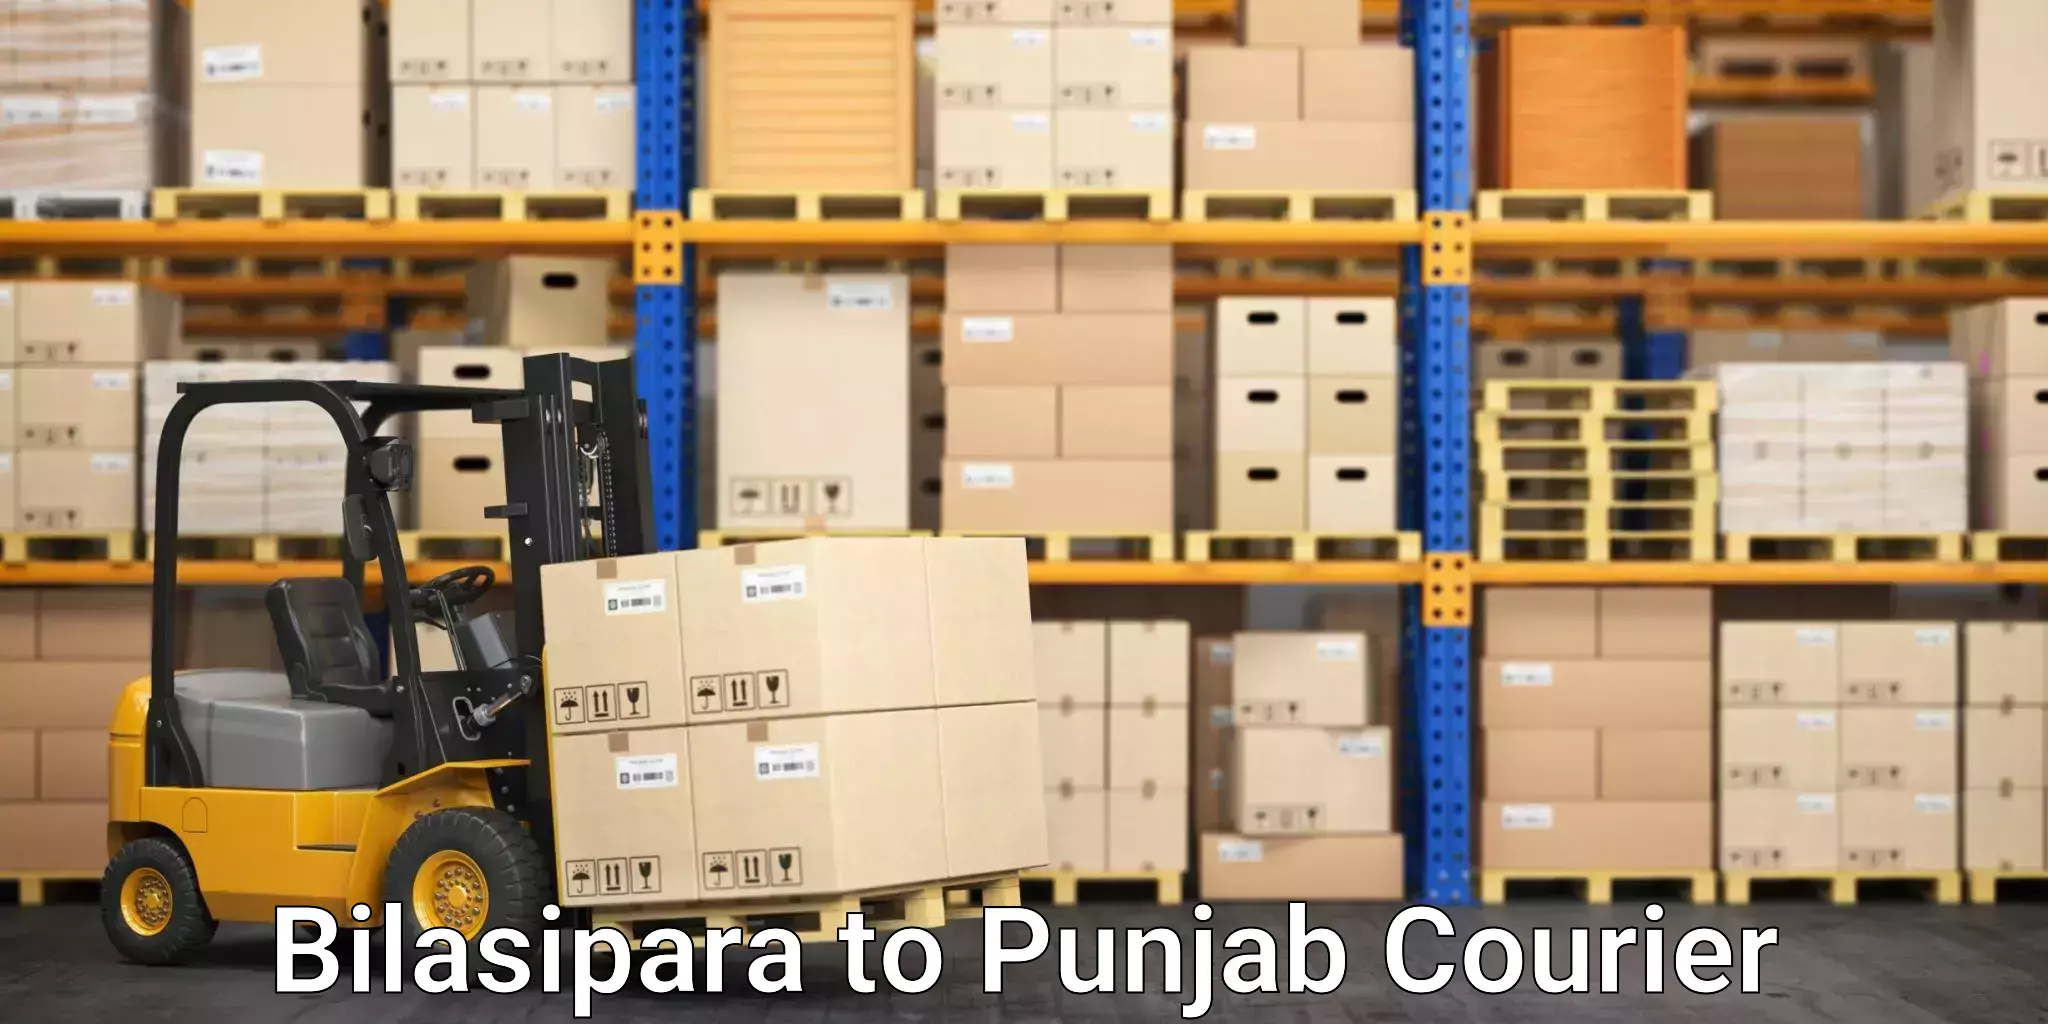 Flexible delivery schedules Bilasipara to Firozpur